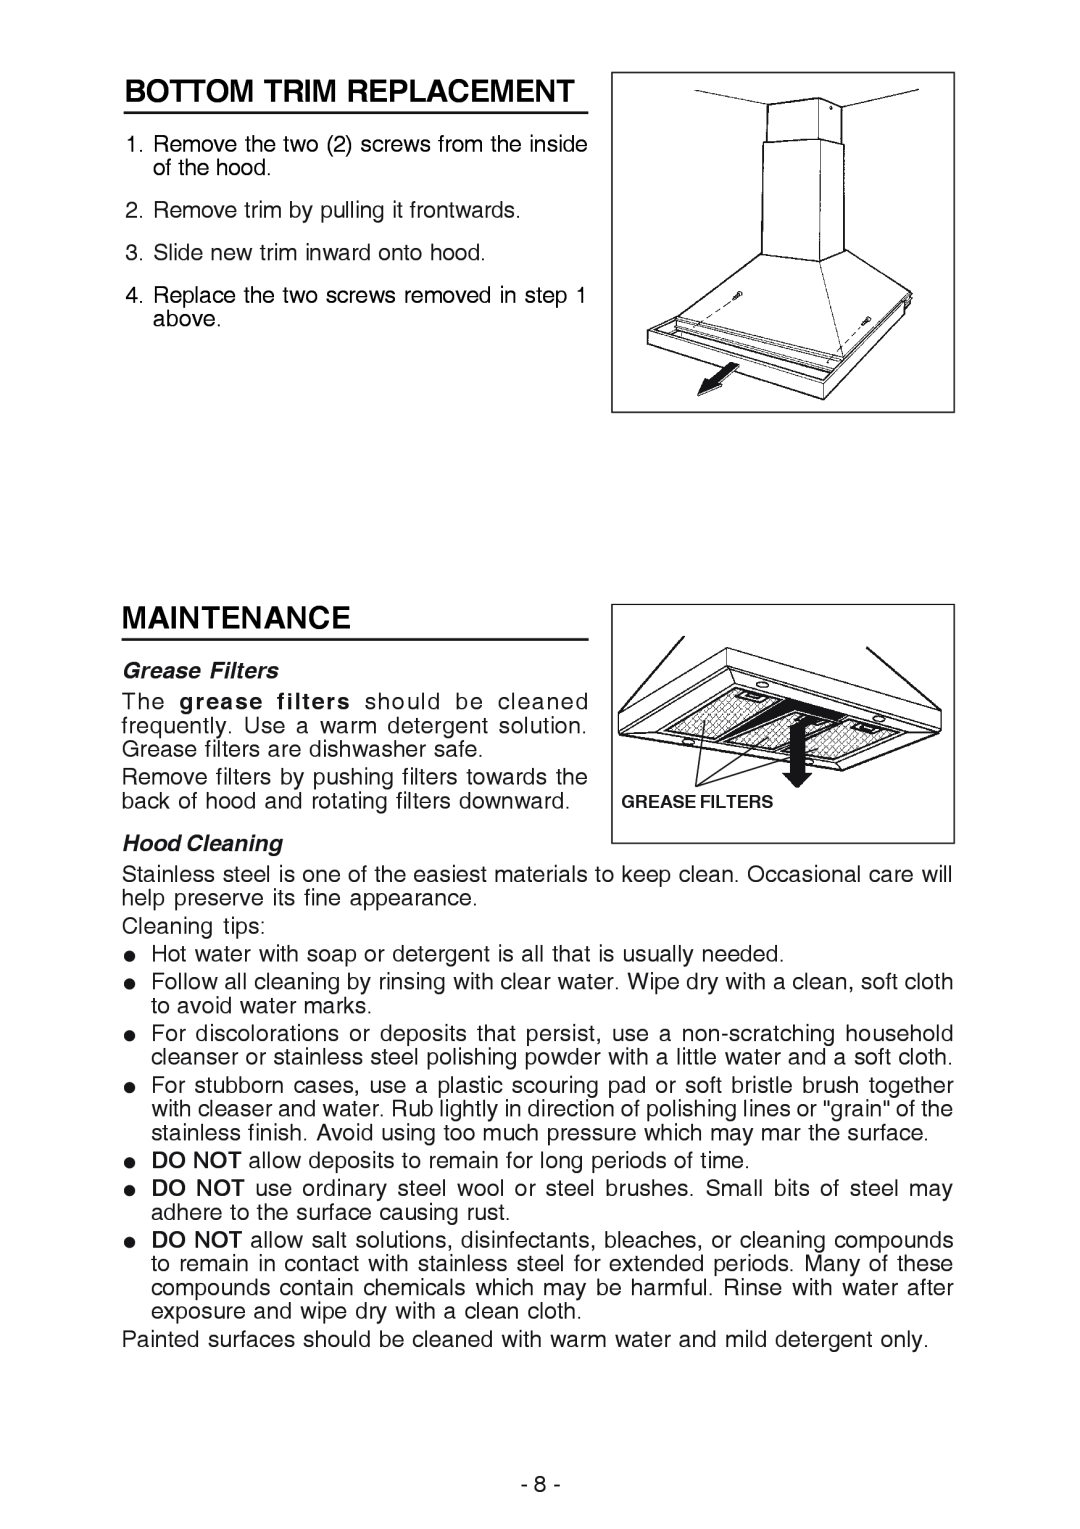 Best K42 manual Bottom Trim Replacement, Maintenance, Grease Filters, Hood Cleaning 